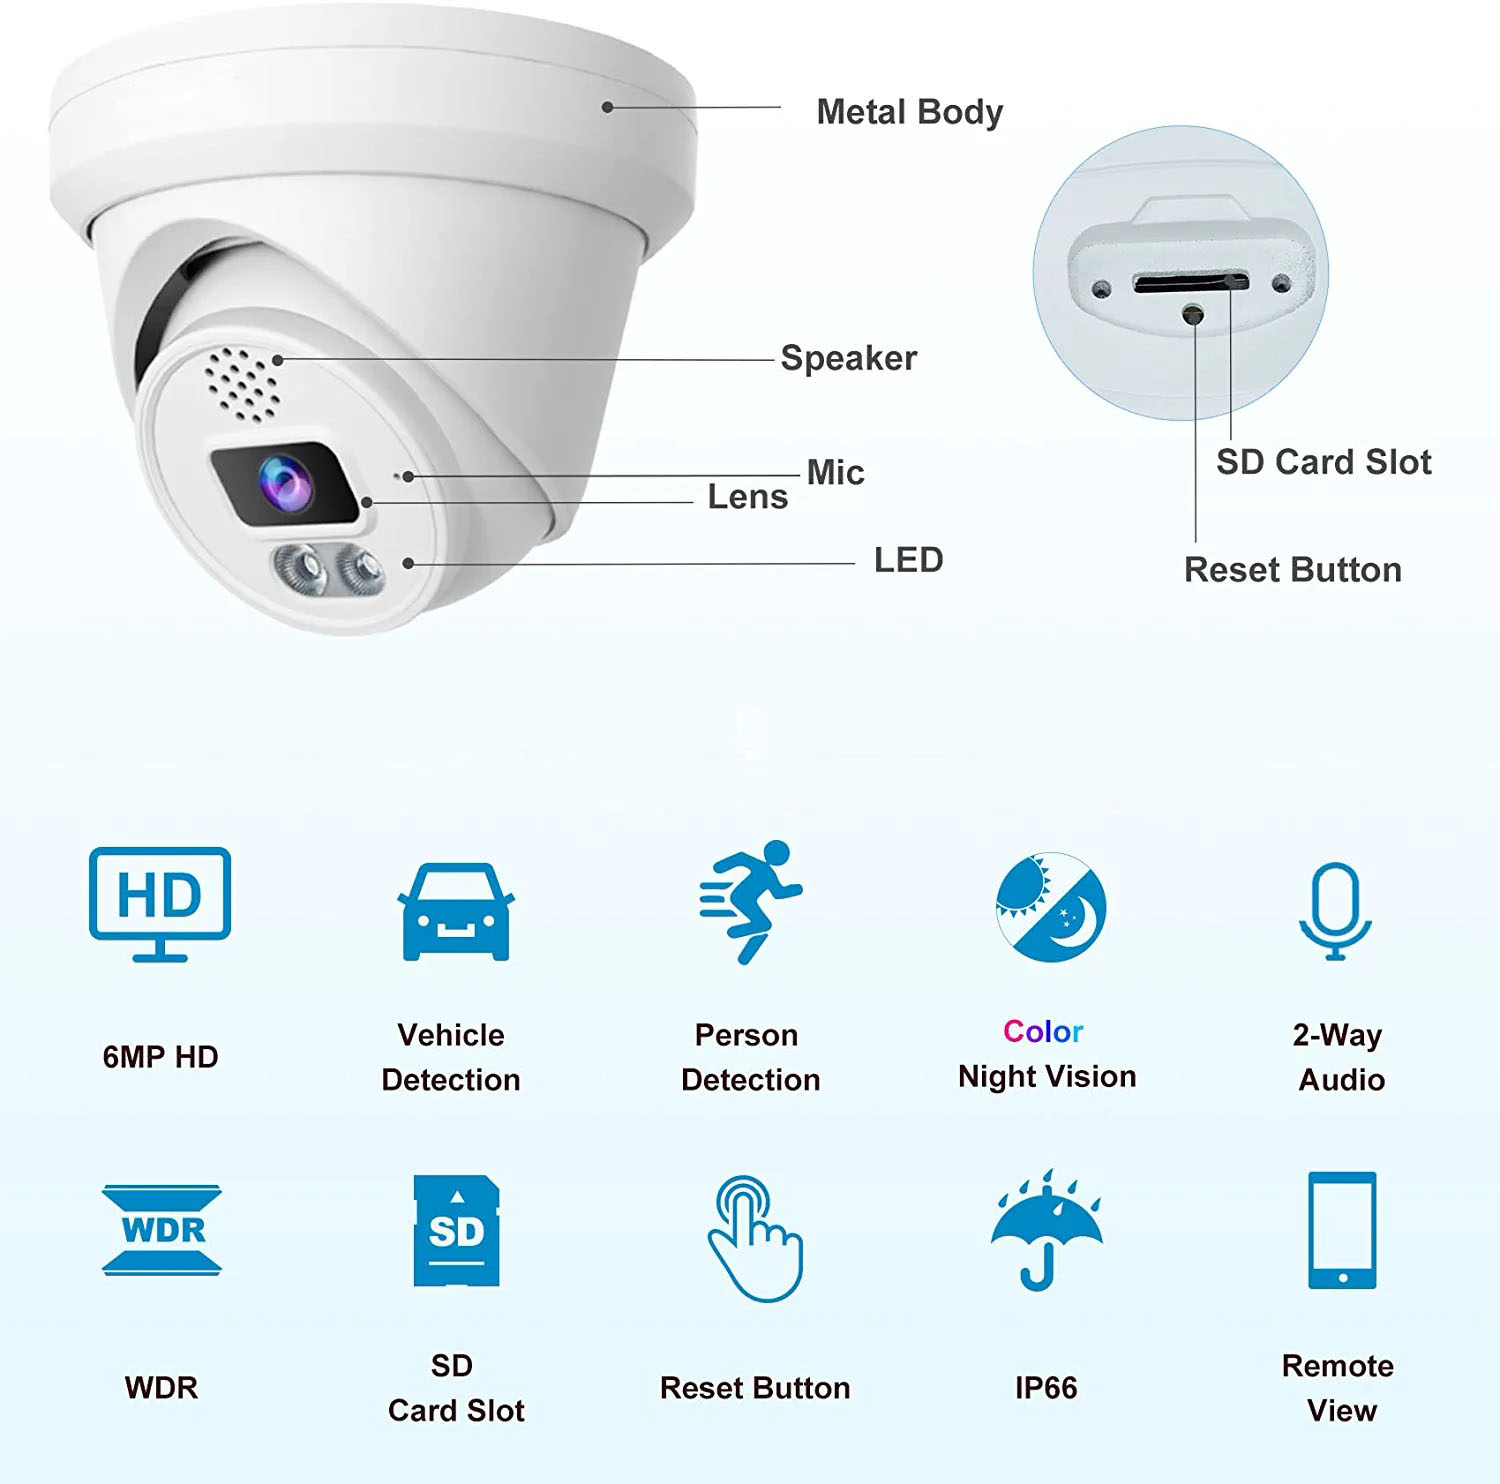 Microseven Open Source 6MP (3072x2048) Full Color Night Vision PoE Indoor / Outdoor IP Camera, UltraHD 6MP PoE IP Turret Security Camera with Human/Vehicle Detection, Two-Way Audio Wide Angle, WDR, DNR, 256GB SD Slot, Waterproof, ONVIF CCTV Surveillance Camera, Web GUI & Apps, VMS (Video Management System) Cloud Storage+ Broadcasting on YouTube, Facebook & Microseven.tv